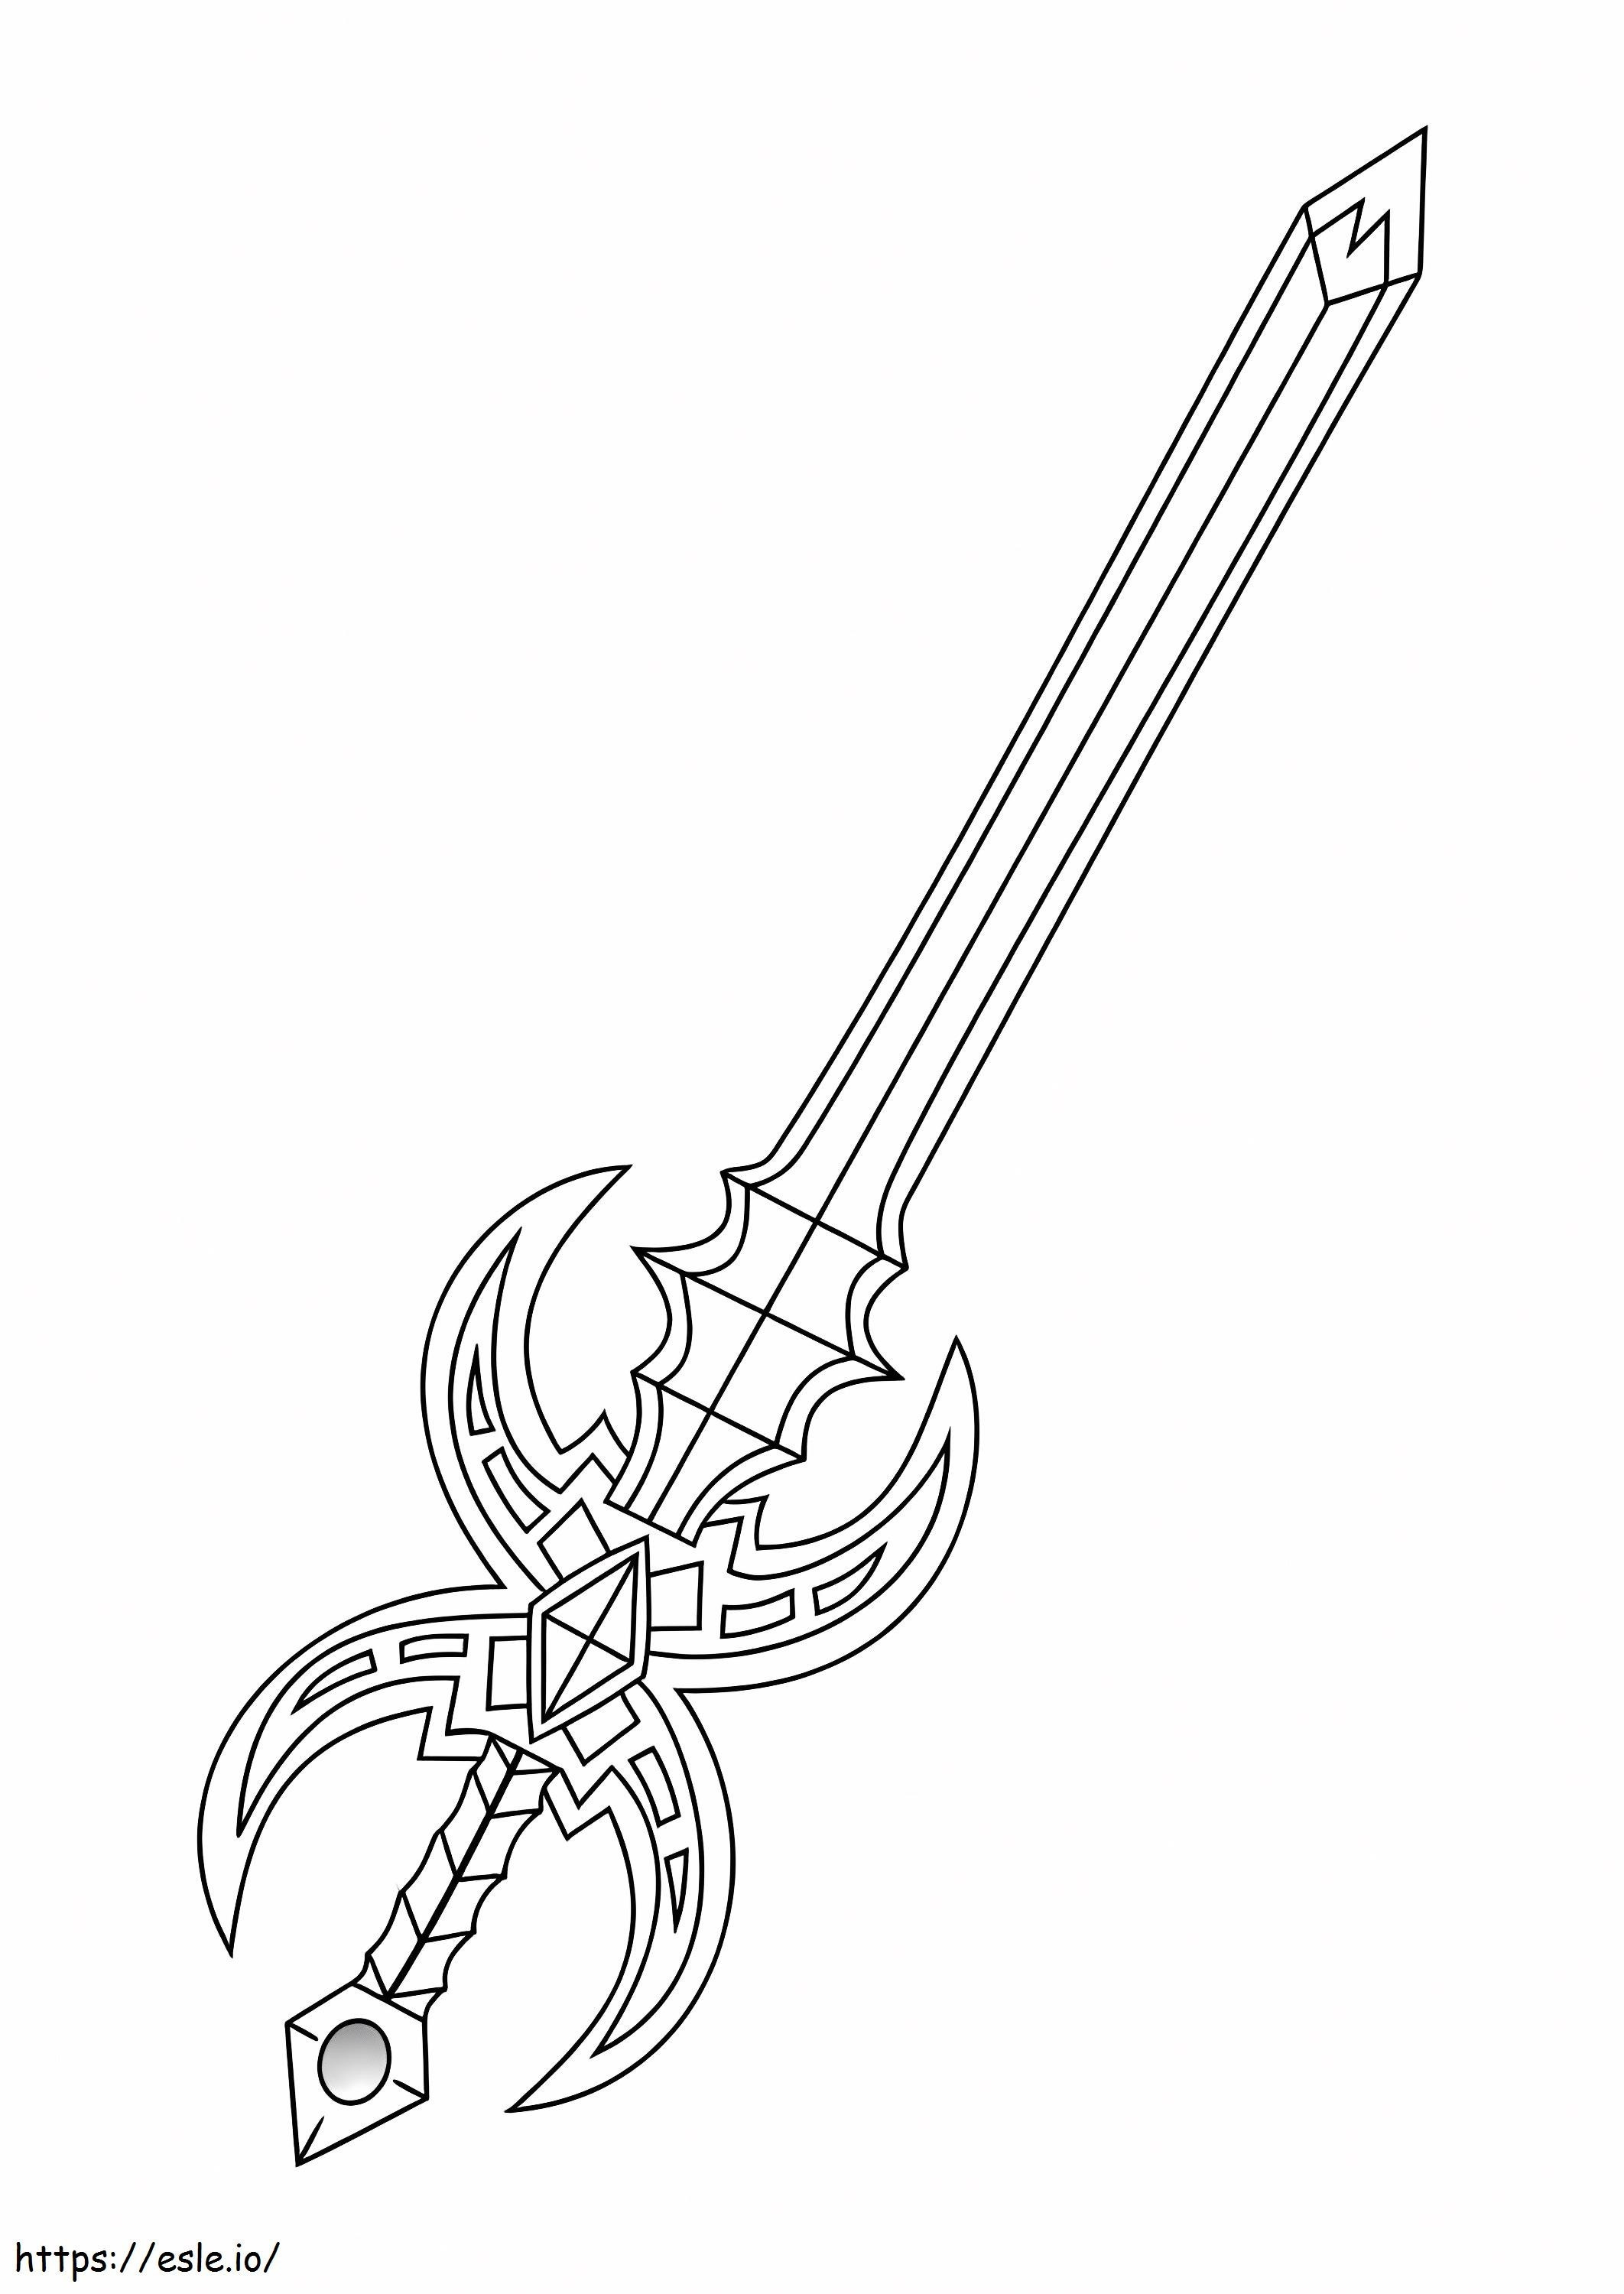 Cool Sword coloring page